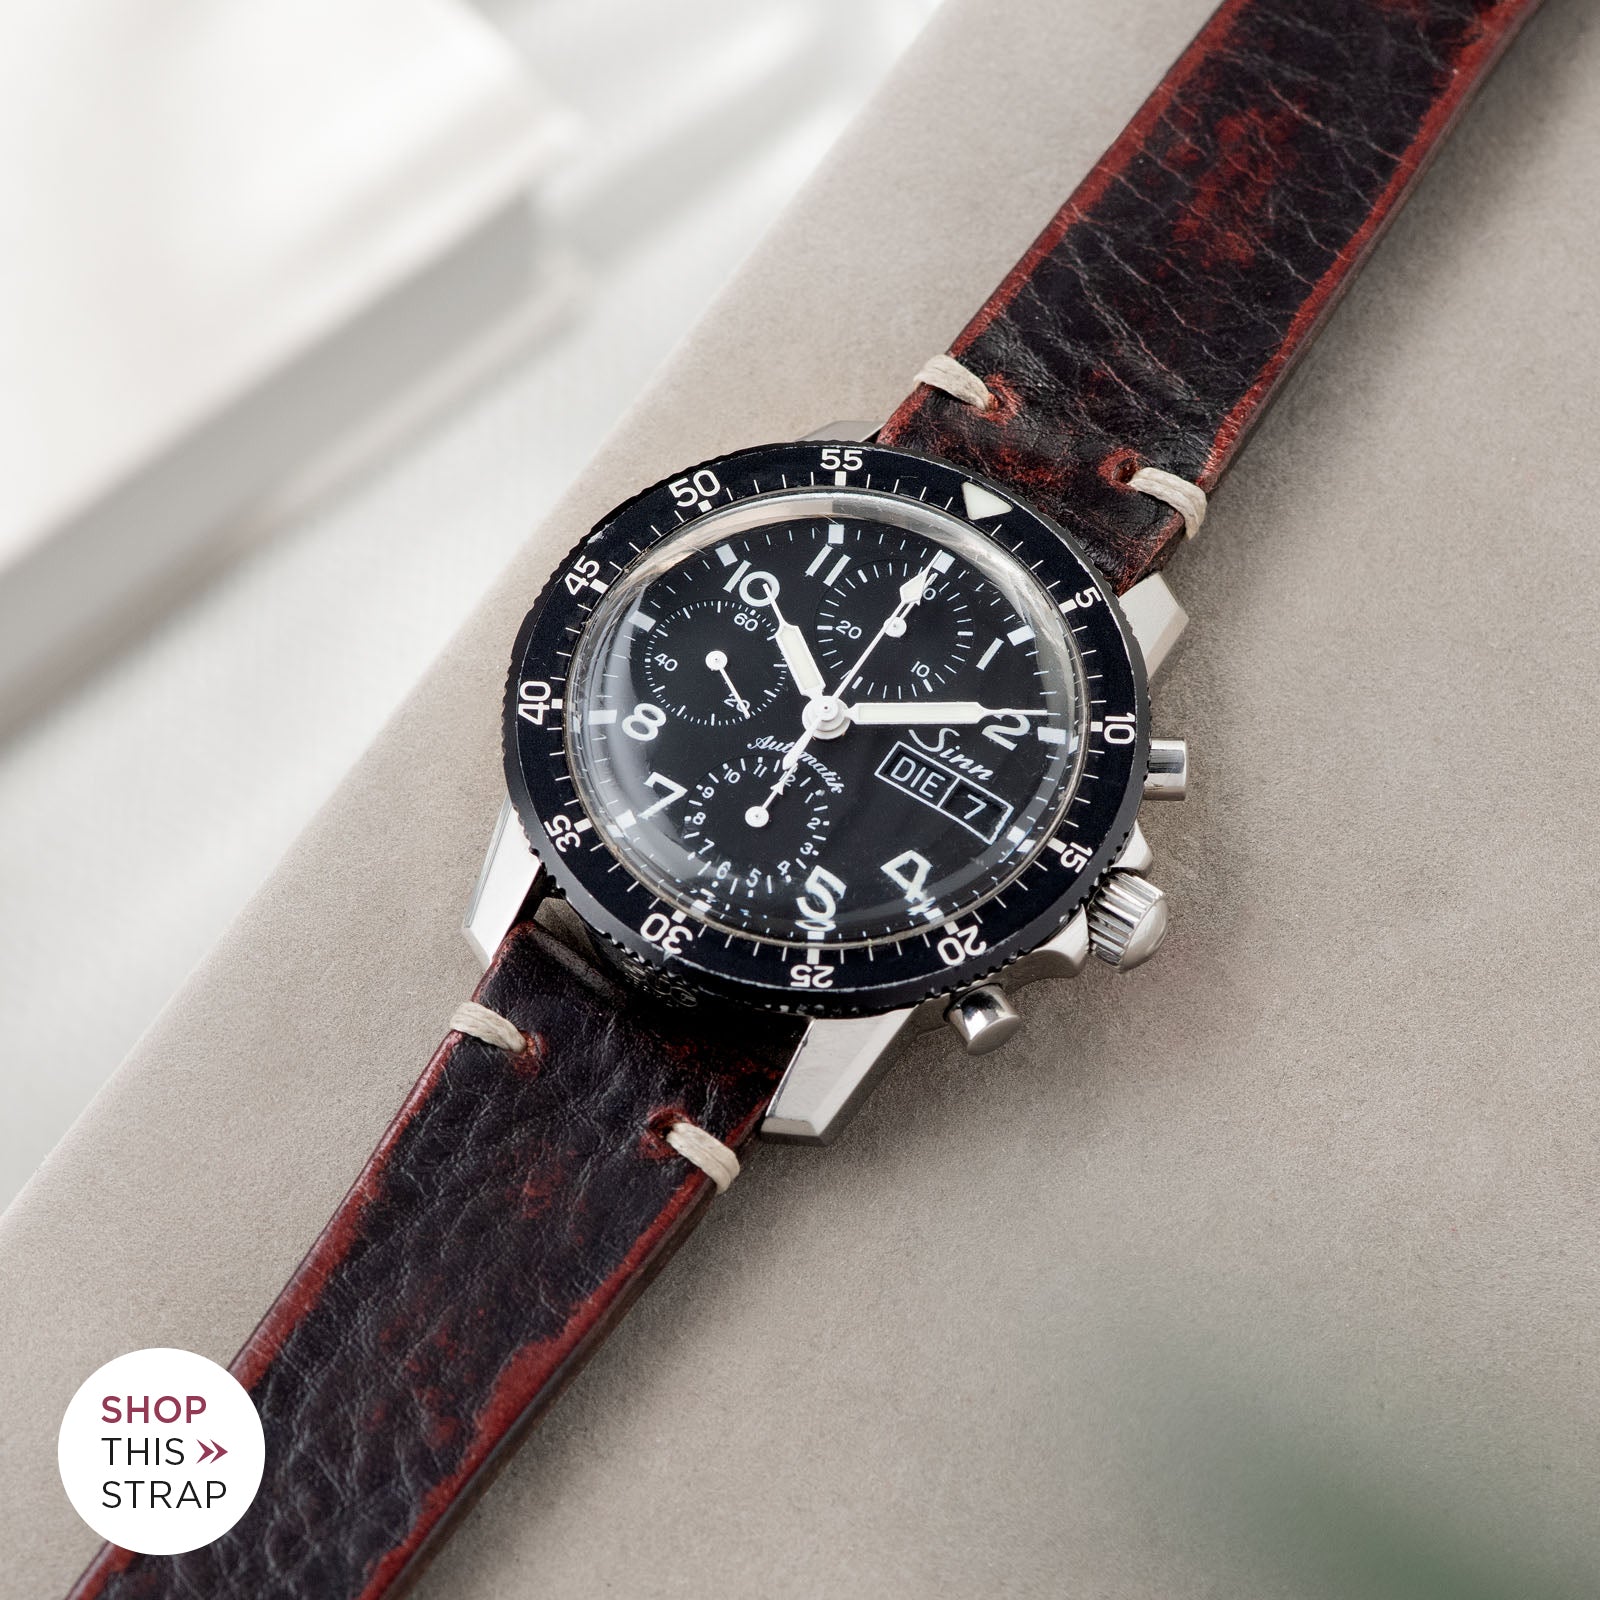 Bulang and Sons_Strap Guide_Sinn 103St Flieder Chronograph_Diablo Black Leather Watch Strap